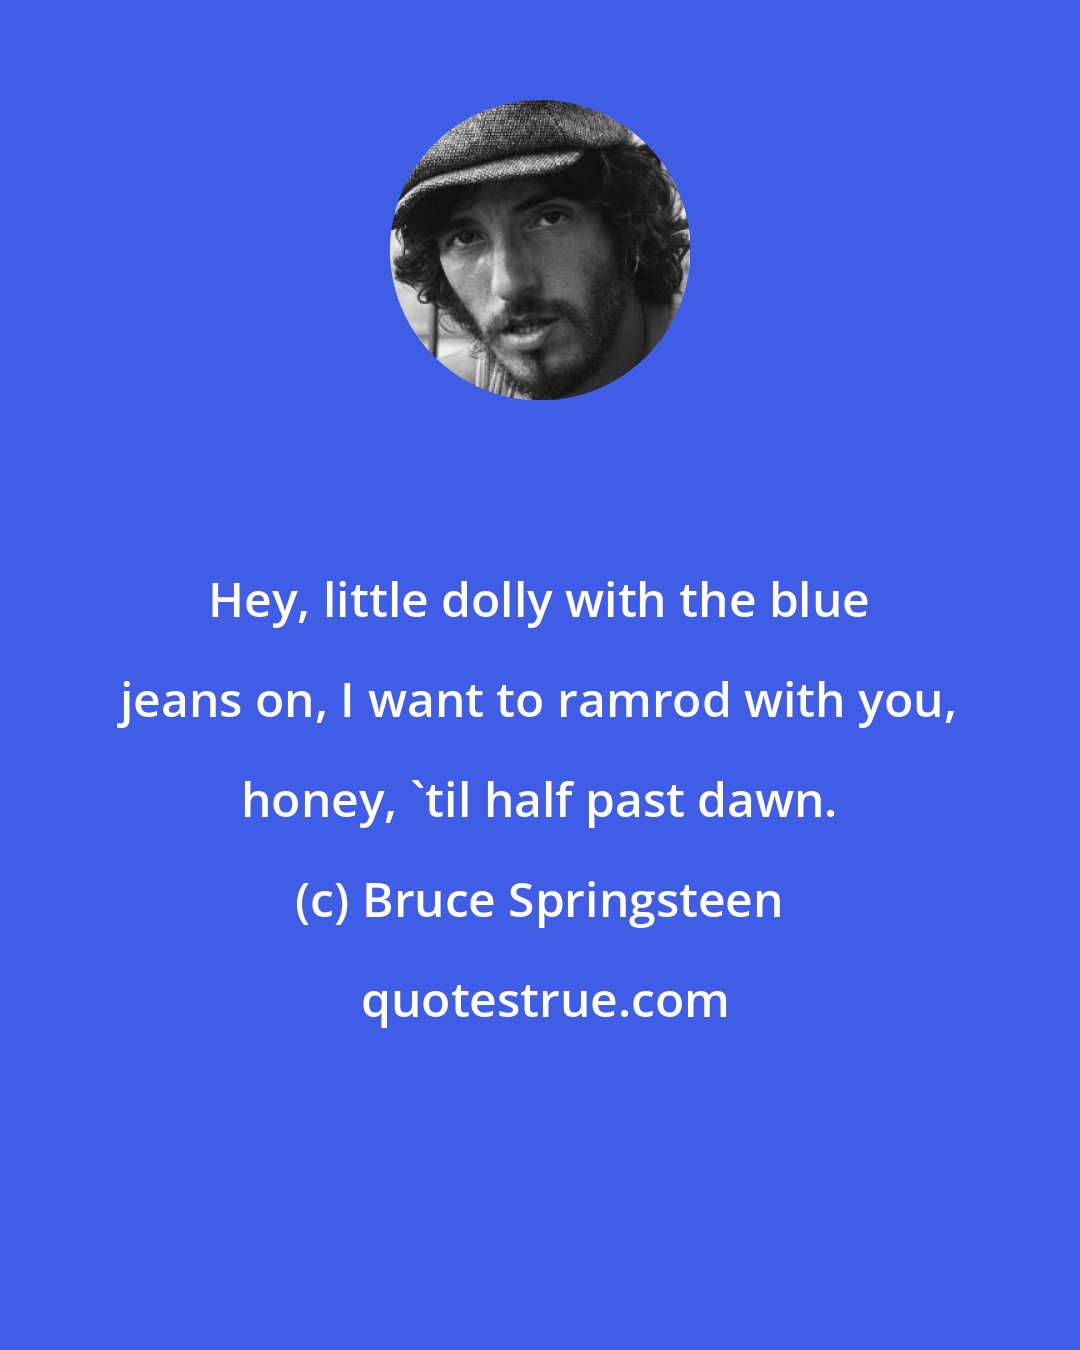 Bruce Springsteen: Hey, little dolly with the blue jeans on, I want to ramrod with you, honey, 'til half past dawn.